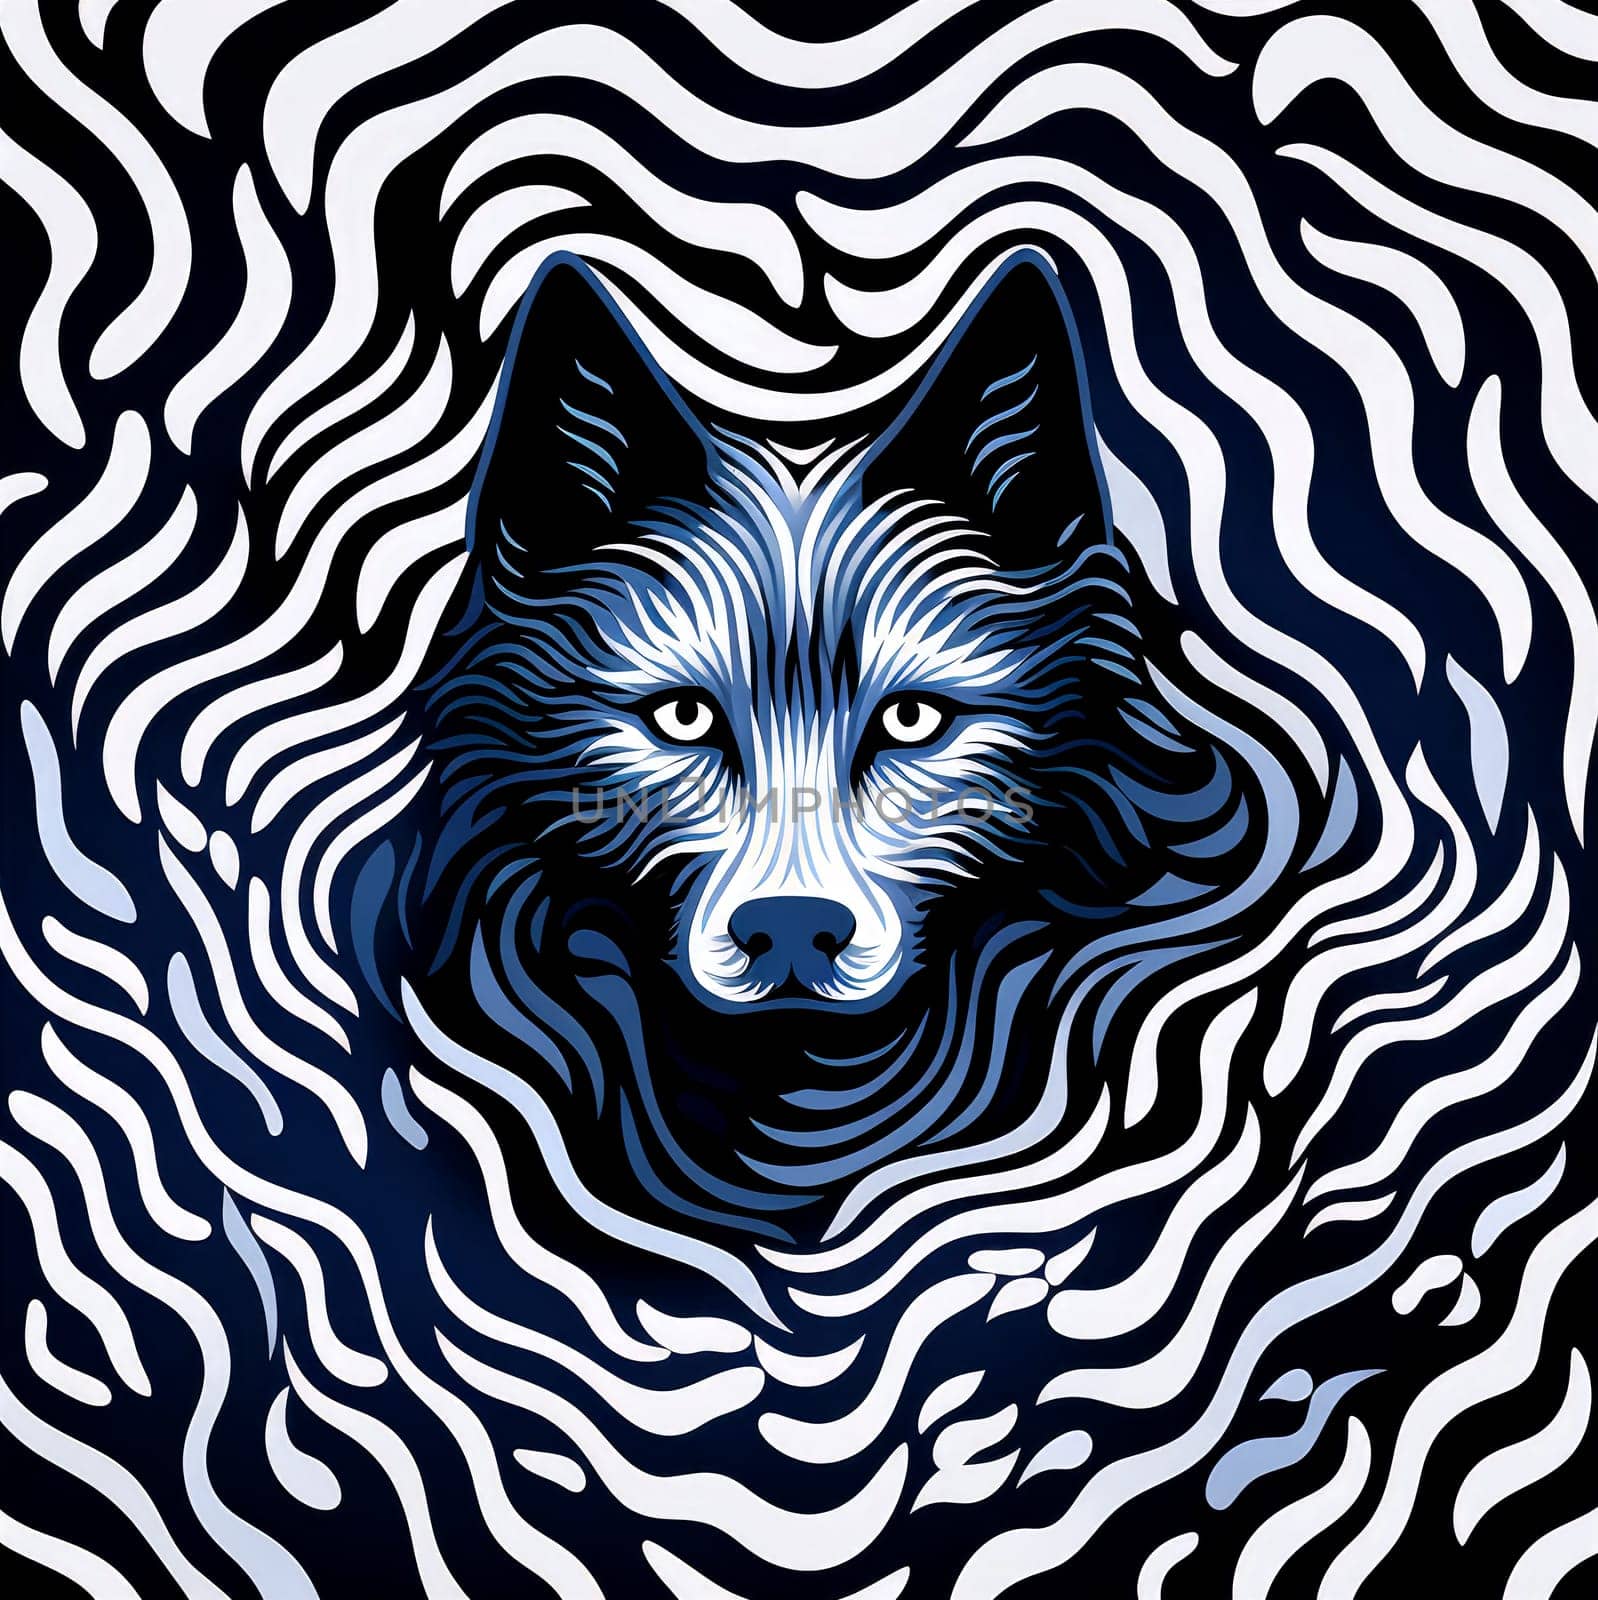 Portrait of a wolf in a decorative psychedelic pop art style. Template for poster, sticker, t-shirt print, sticker, etc.